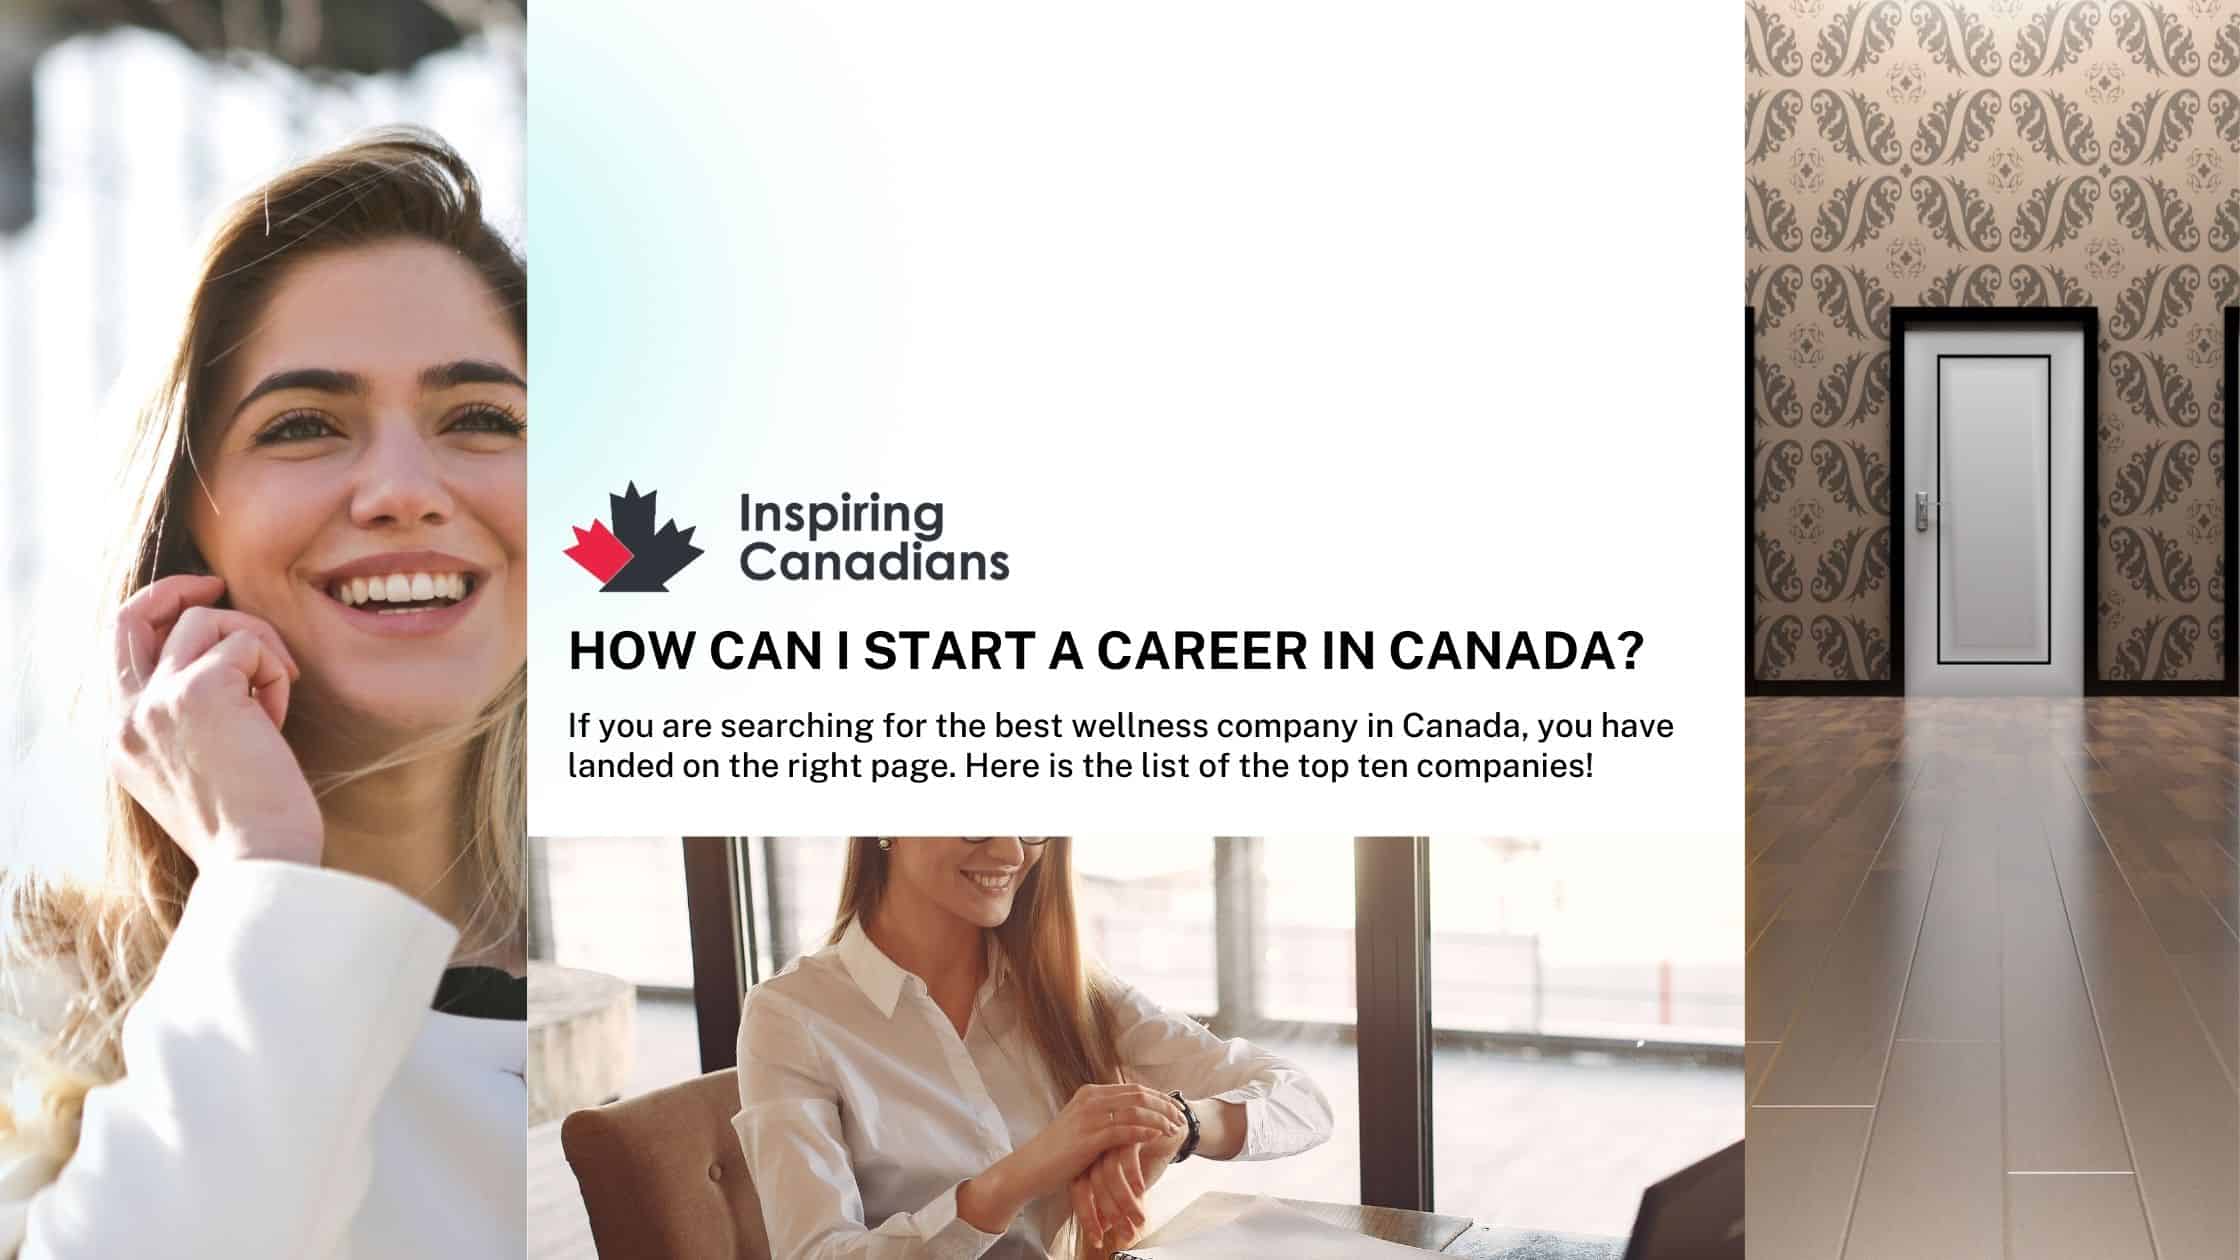 How can I start a career in Canada?